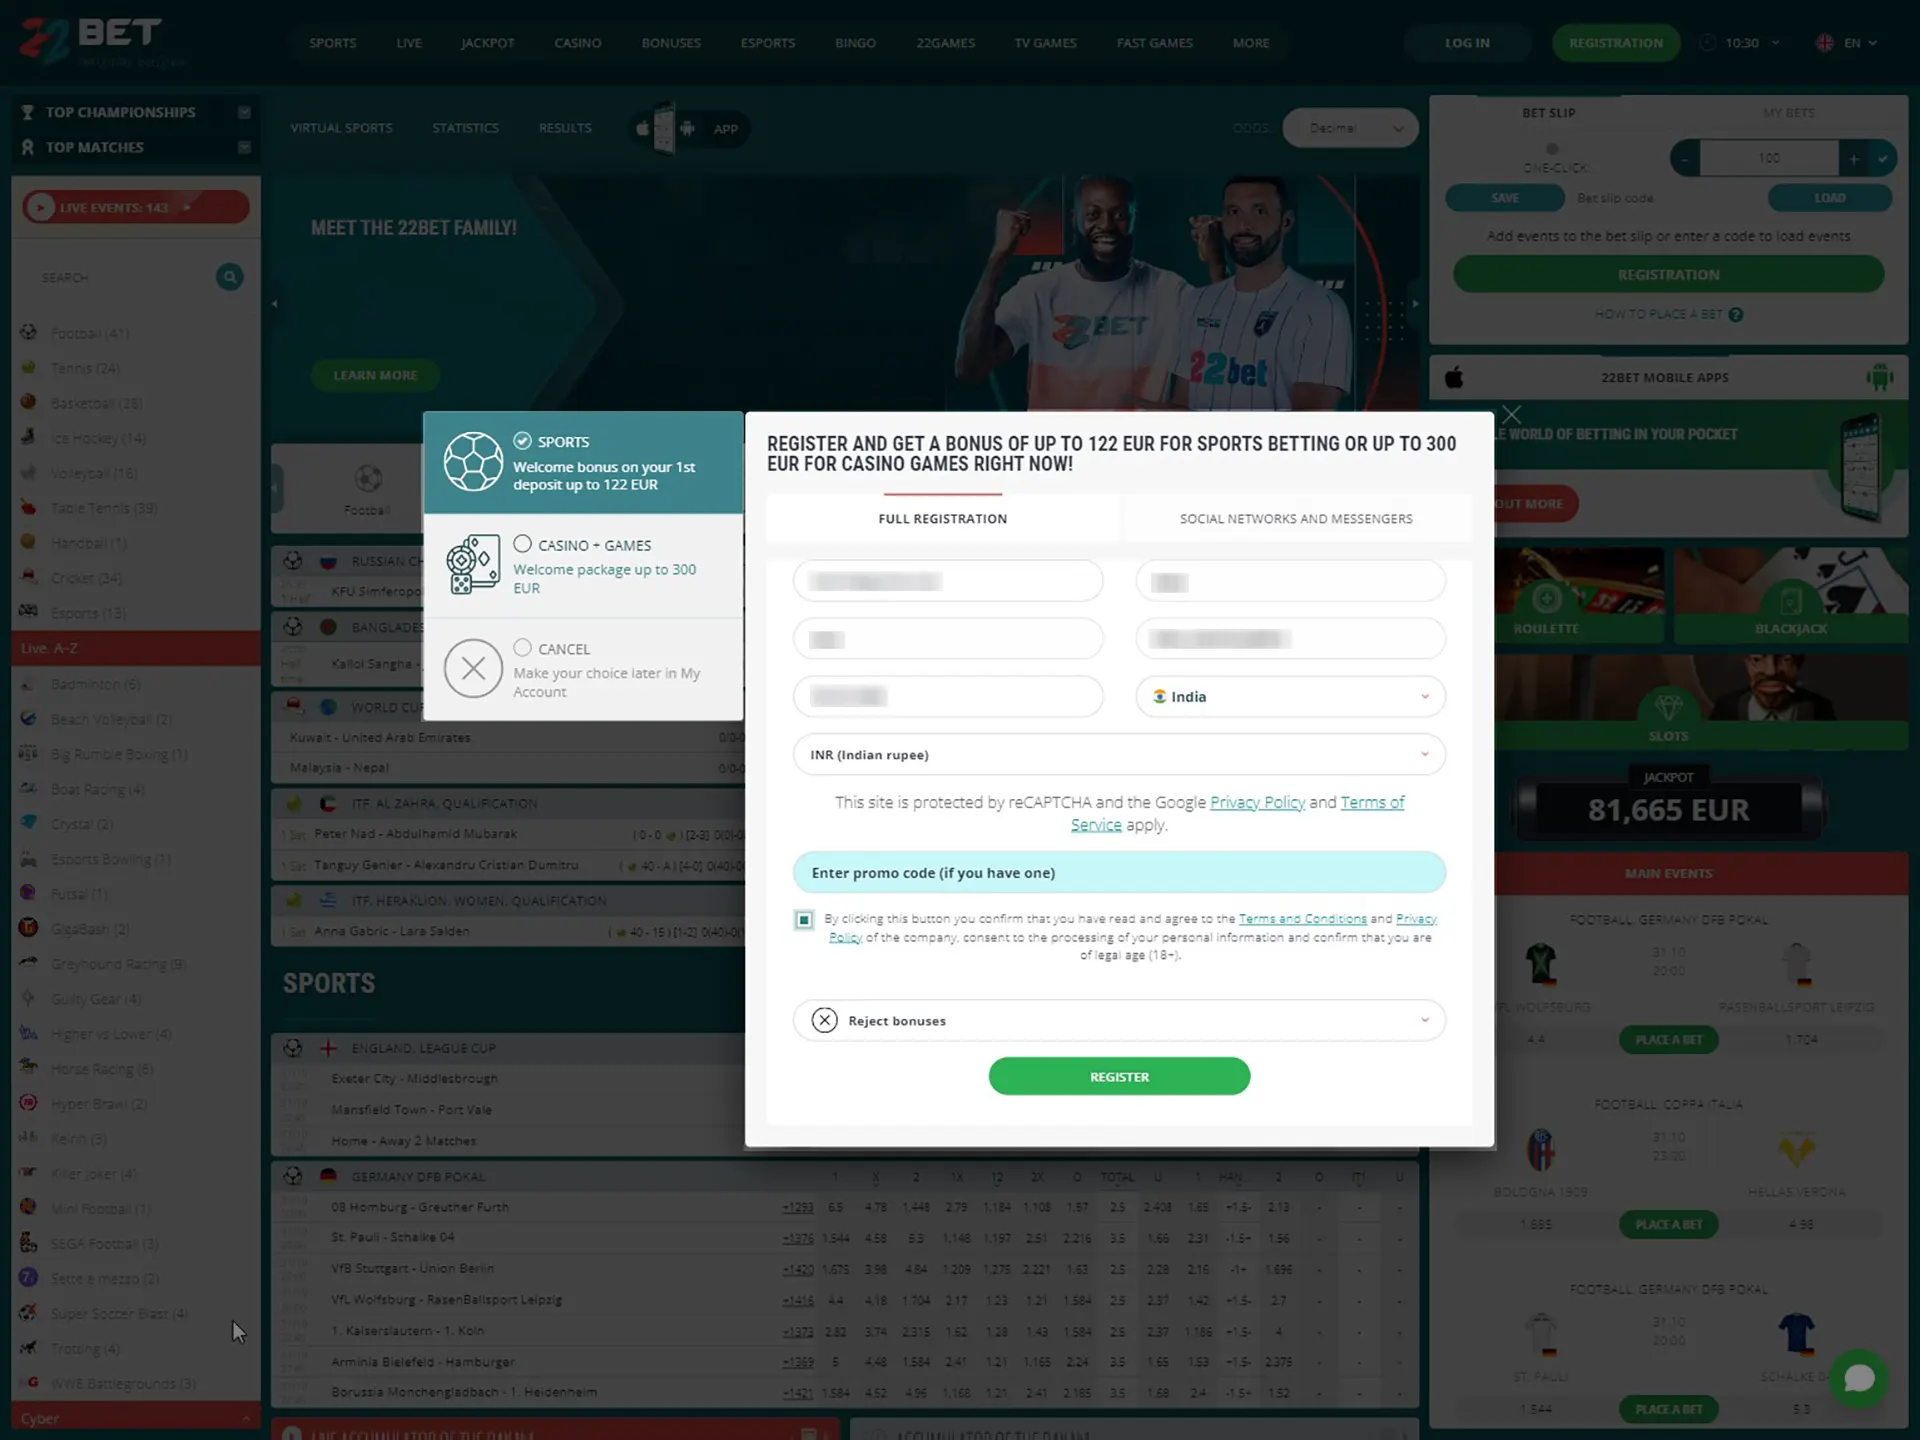 Fill in the registration form on the 22Bet website.